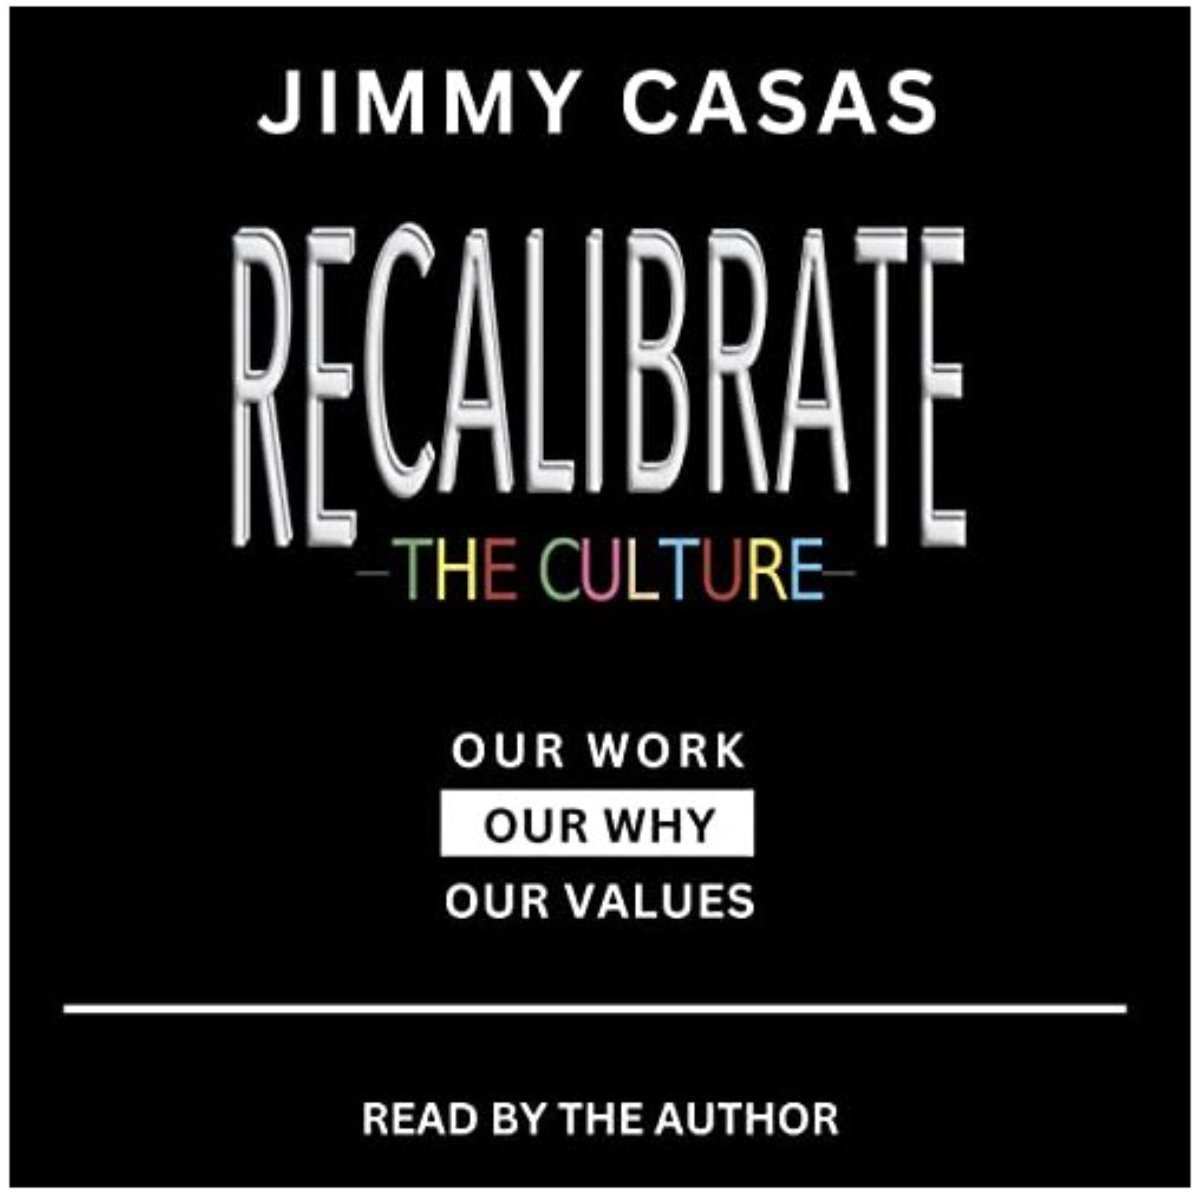 Congrats to my fellow educators as you complete another successful school year. It is now time to focus on you. Recalibrate the Culture is available to you now, whether you choose to hold a book in your hand, listen to audio, or work with your team to take action, all three